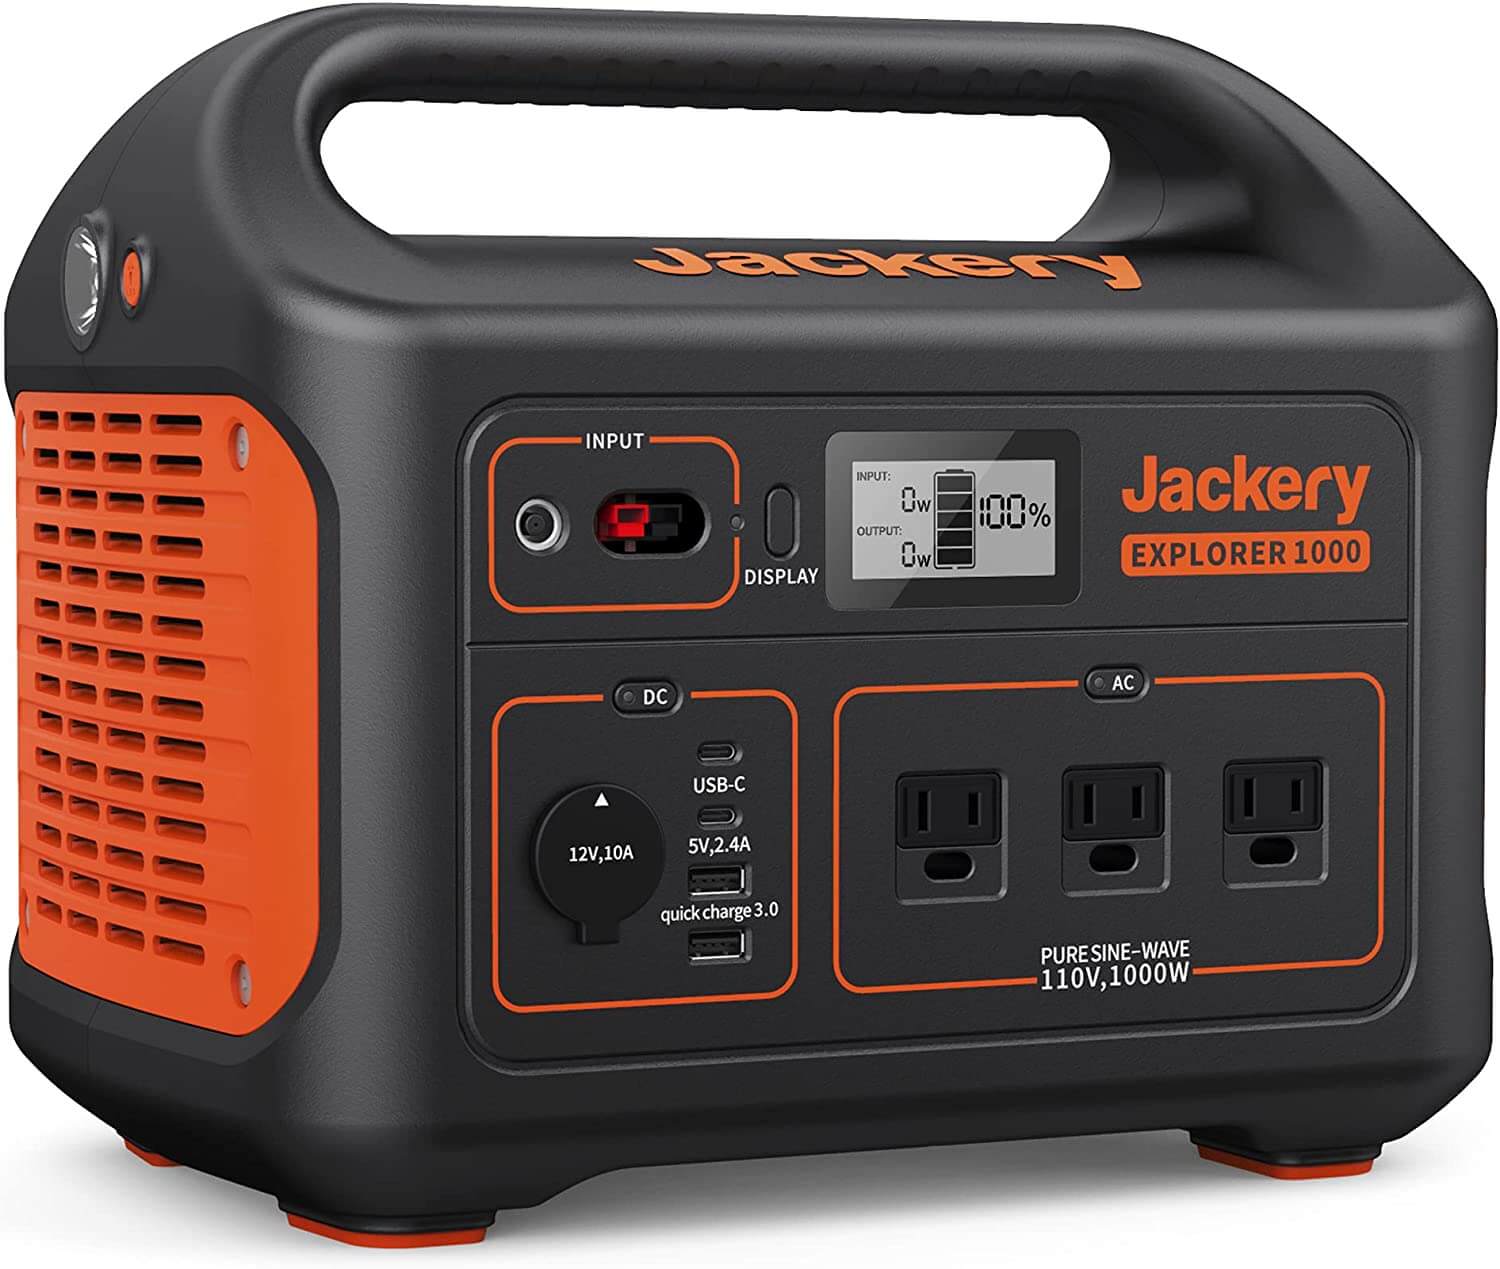 Best-Portable-Power-Station-for-Home-and-Camping-Jackery-Portable-Power-Station-Explorer-1000